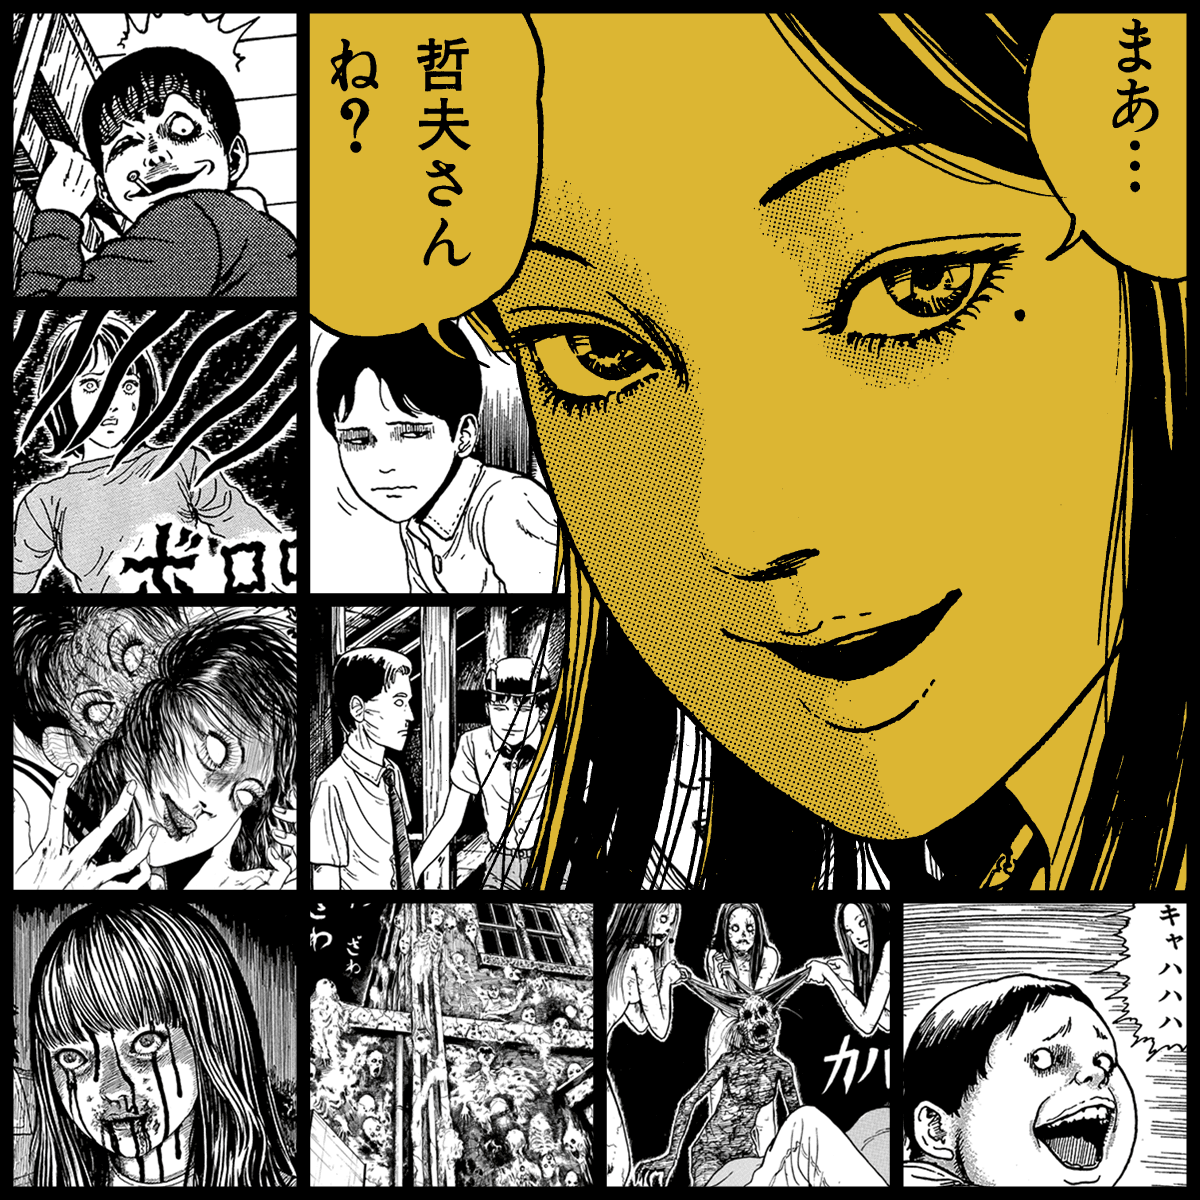 TOMIE by Junji Ito #1227